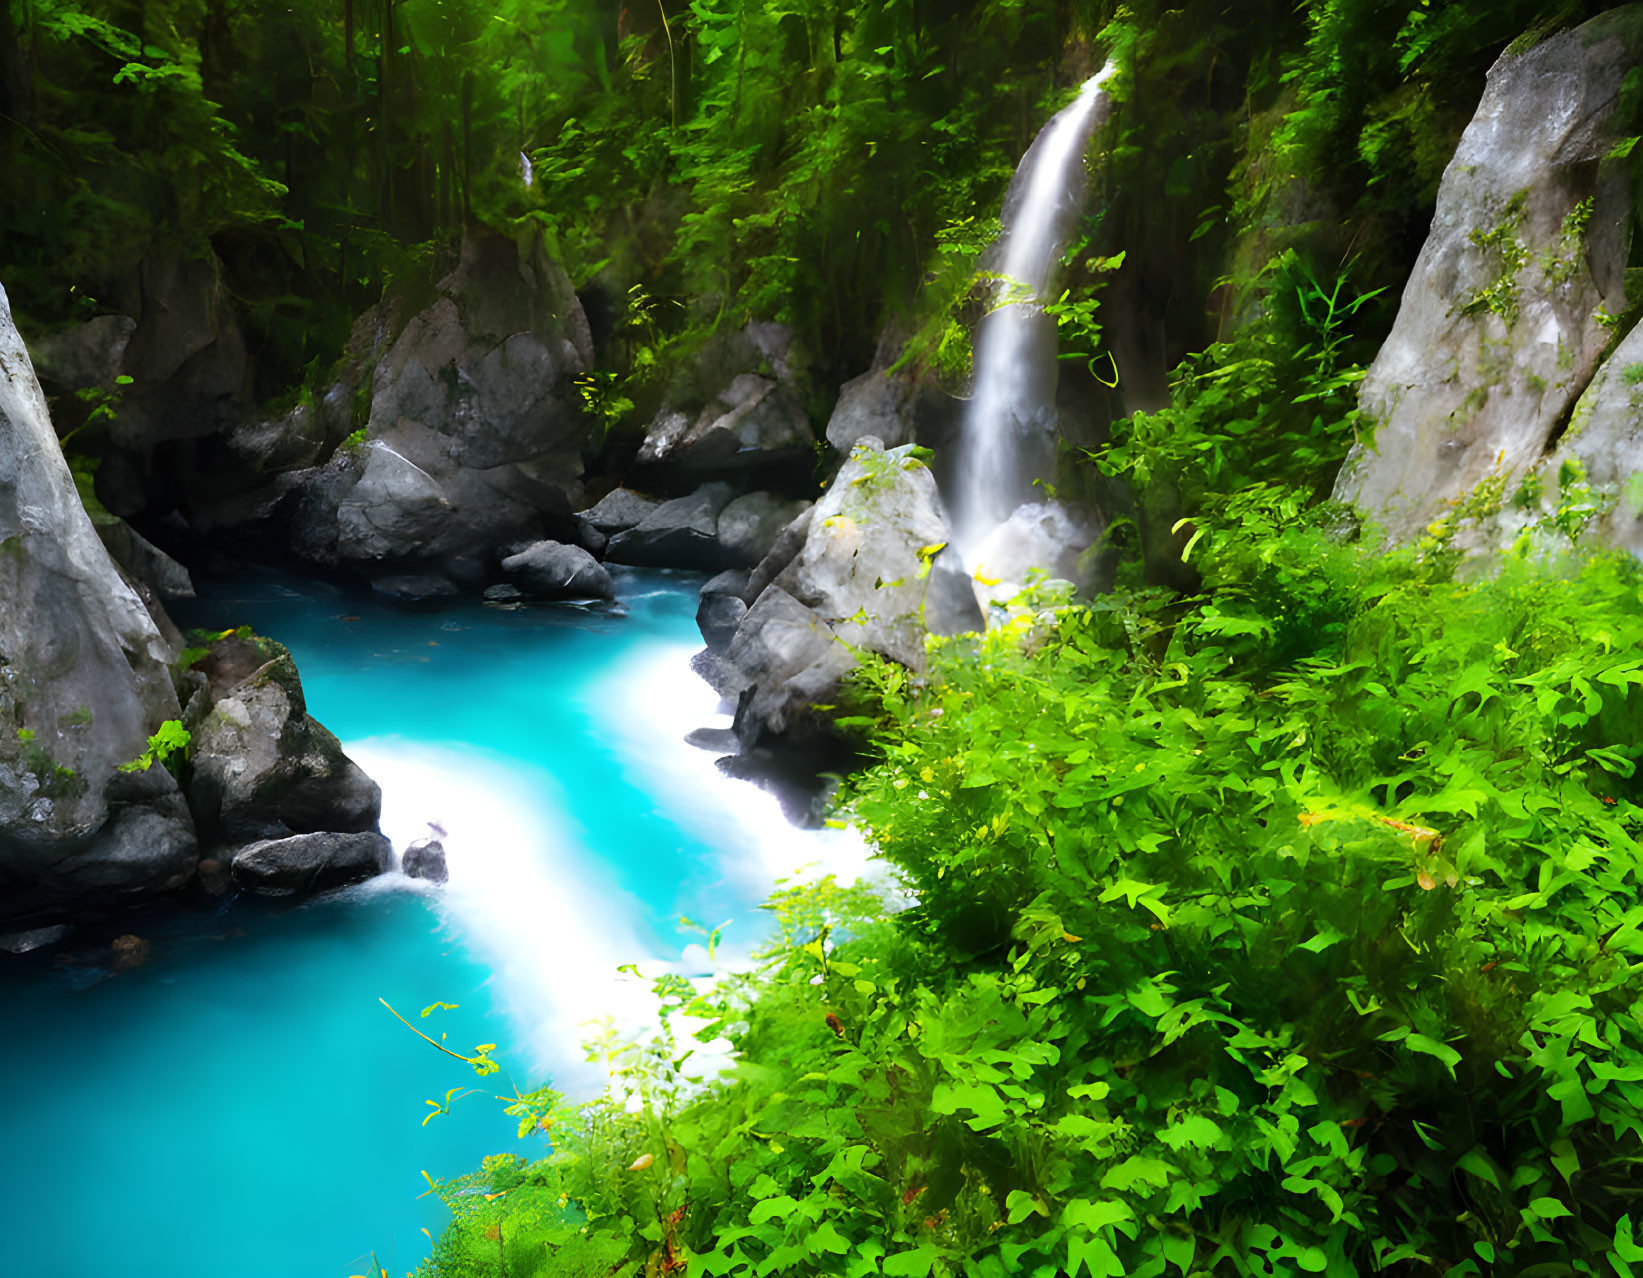 Tranquil turquoise stream in rocky landscape with waterfall